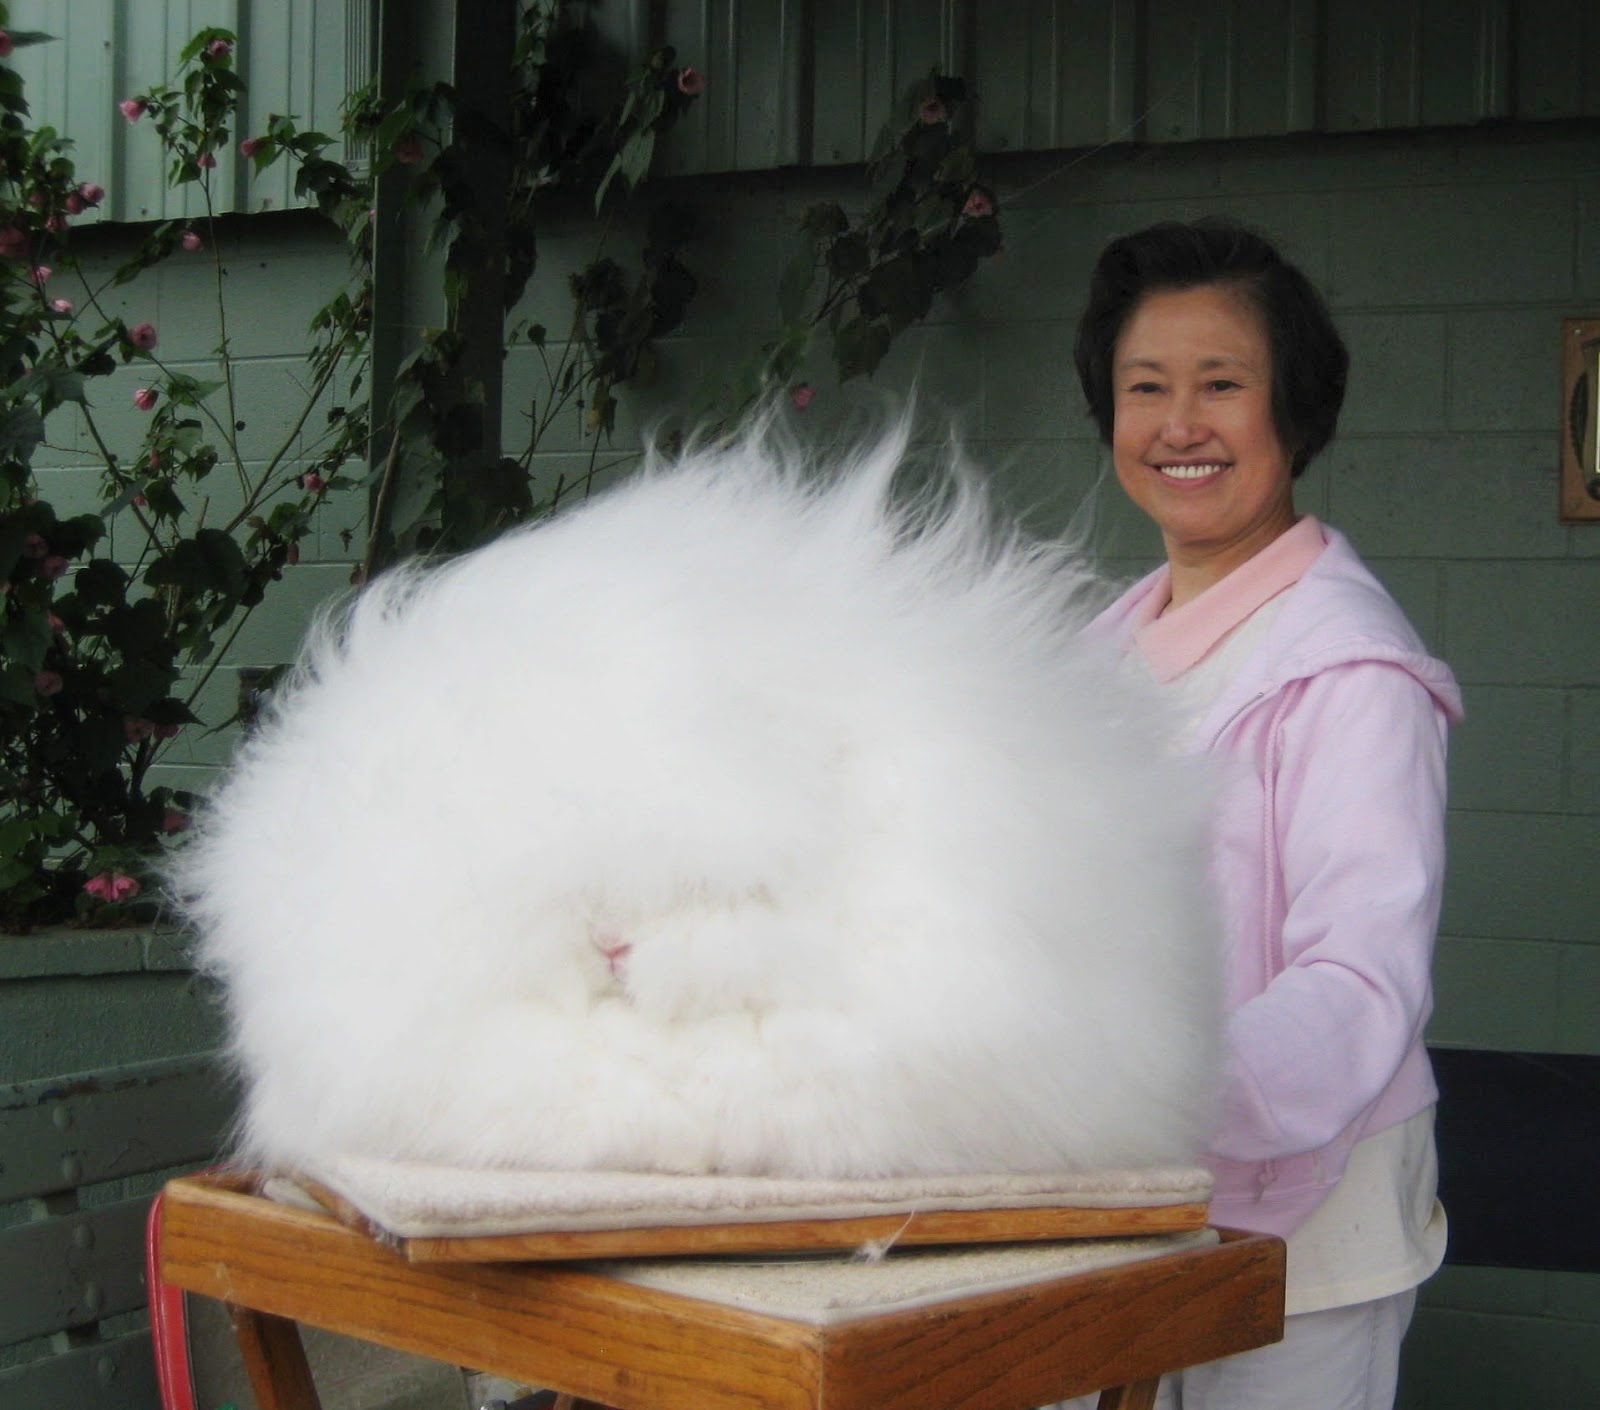 The fluffiest rabbit I have ever seen